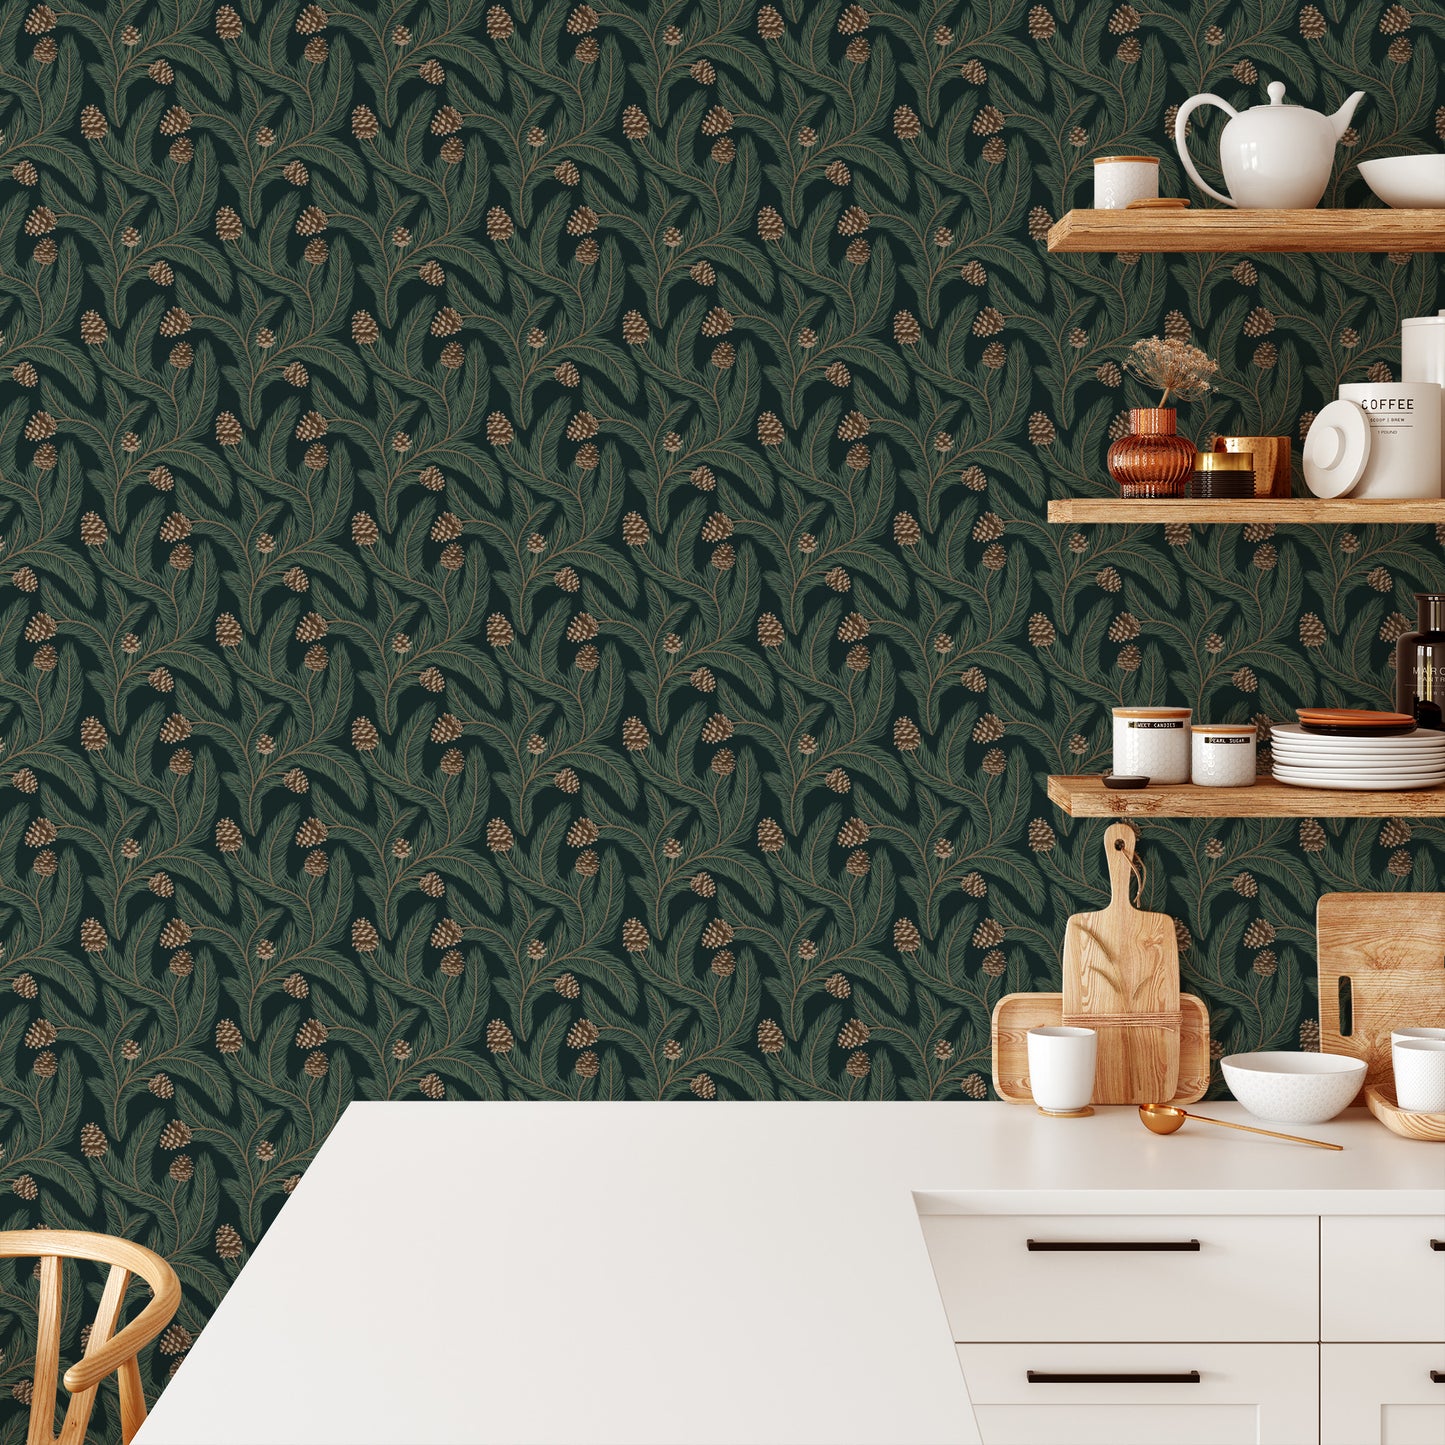 Bedroom featuring Cayla Naylor Sitka- Forest Peel and Stick Wallpaper - a nature inspired pattern